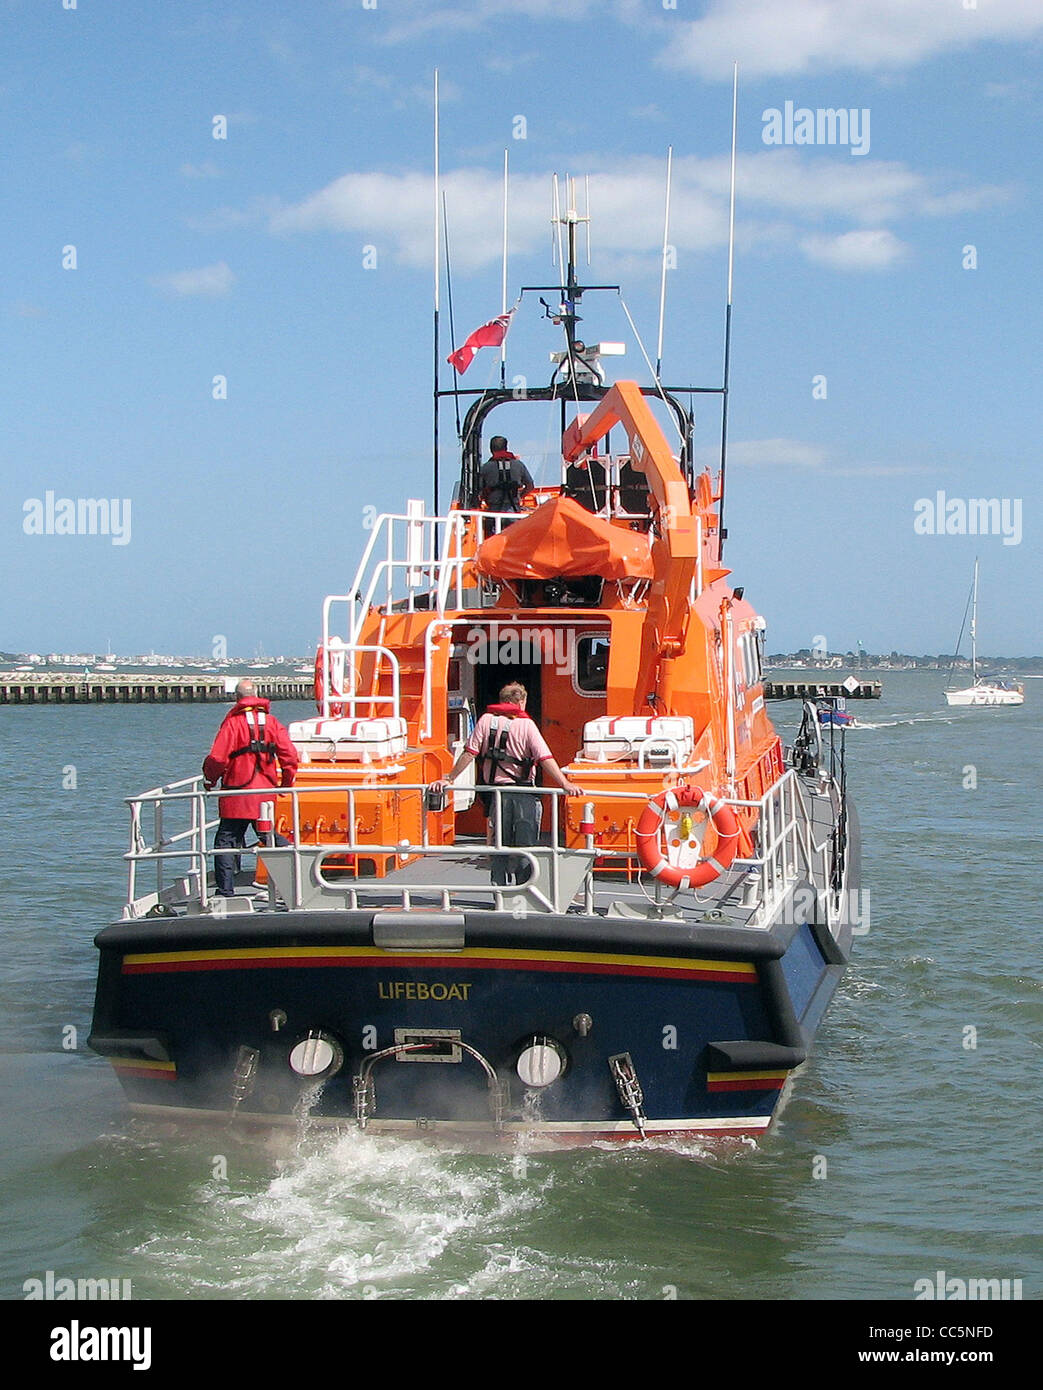 The stern of UK lifeboat 17-31 (Severn class) in Poole Harbour, Dorset, England. Stock Photo